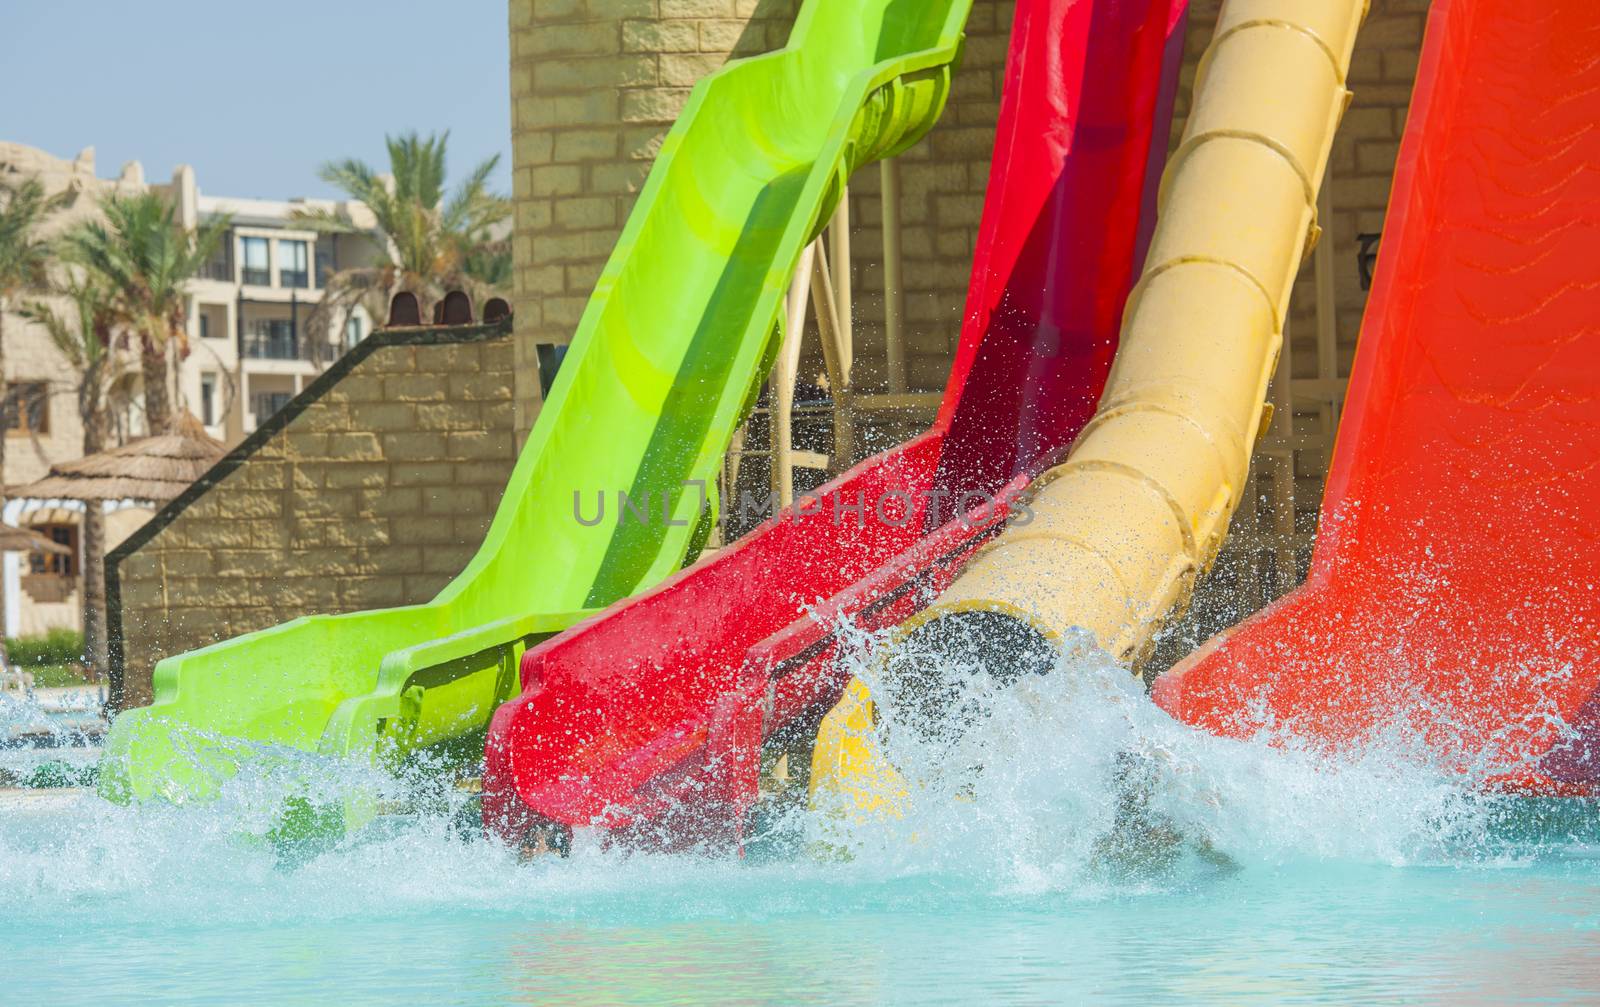 Water slides at a large swimming pool in luxury tropical hotel by paulvinten